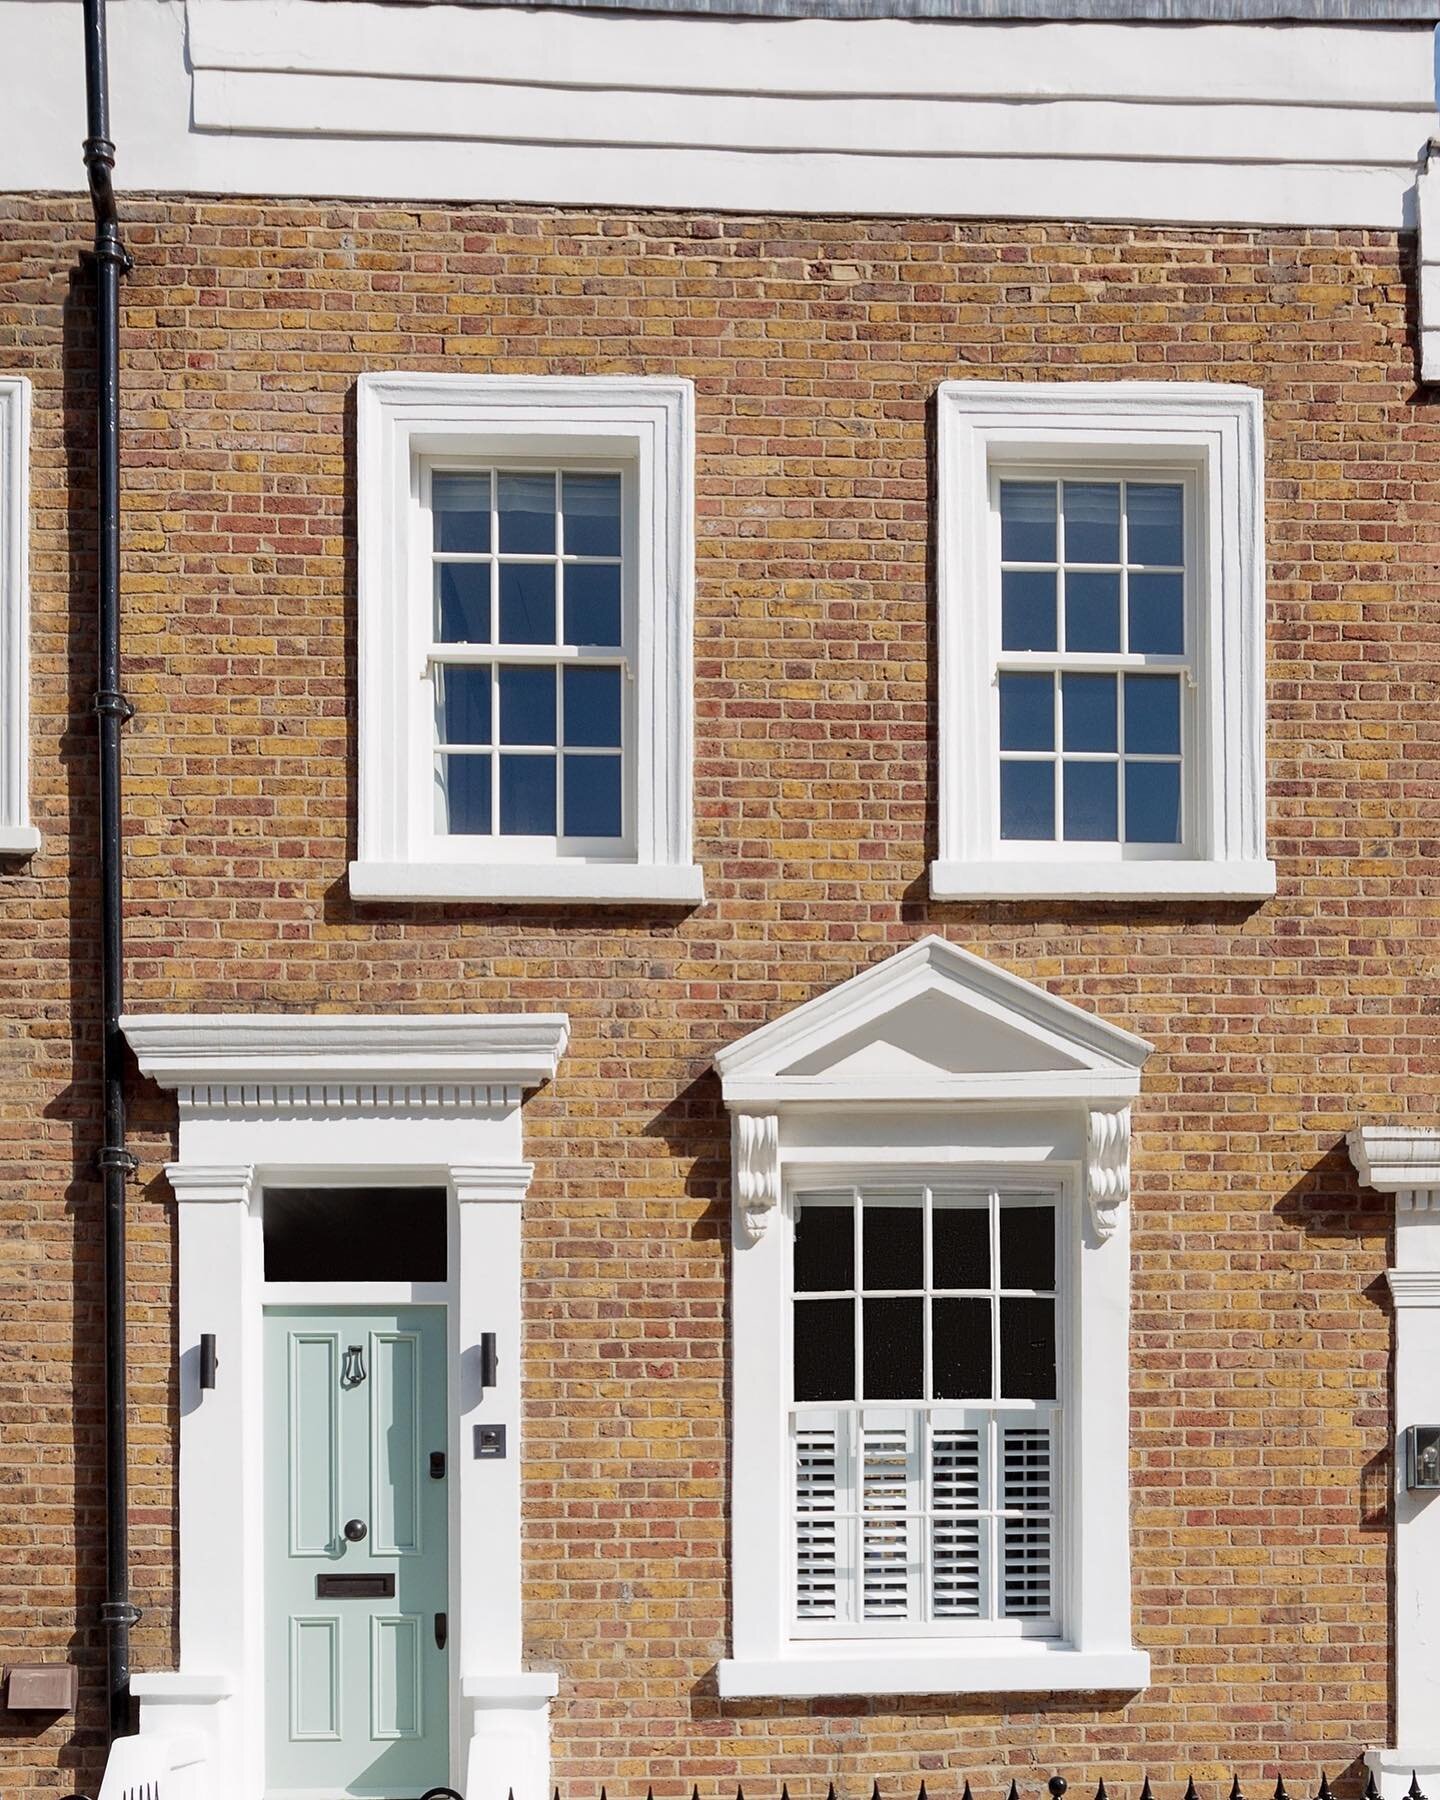 Add a touch of charm to your home with expertly crafted sash windows, with the versatility to be made to fit the traditional street aesthetic

.⁠
.⁠
.⁠
 #projectlondon #homerenovation #interiordesign #houseextensions #maximisespace #greenkitchen #sli